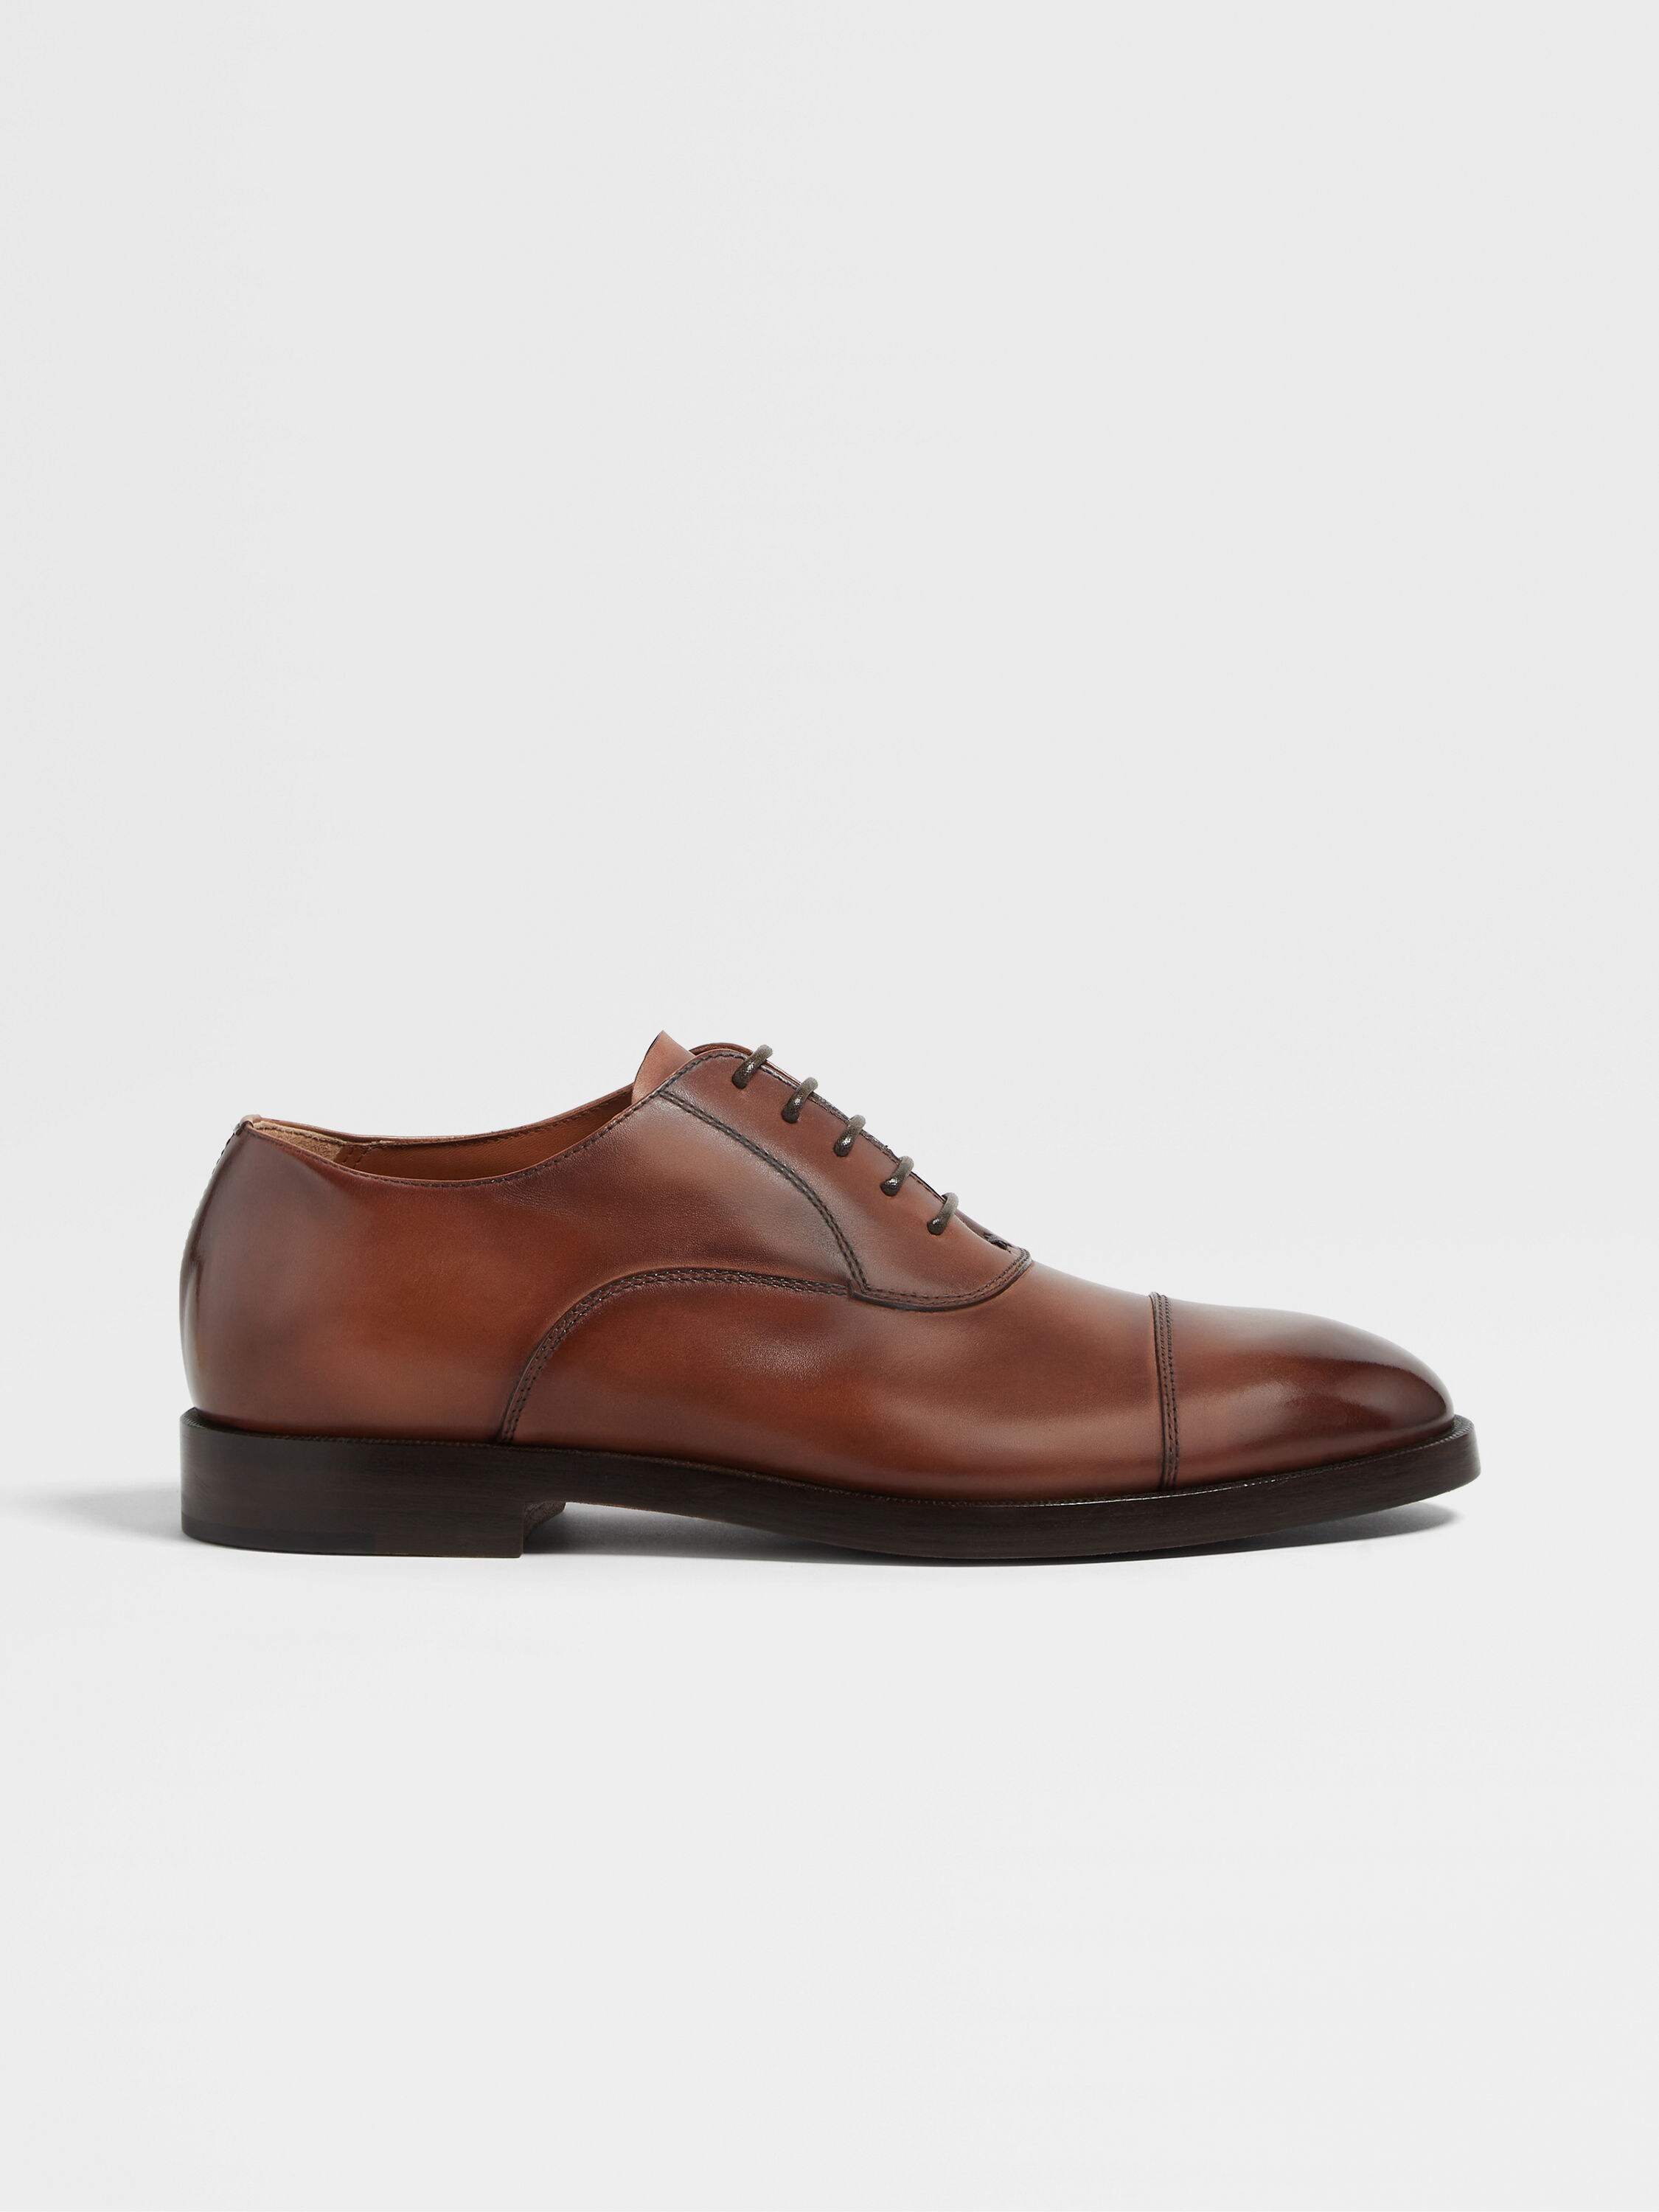 Light Brown Leather Torino Oxford Shoes